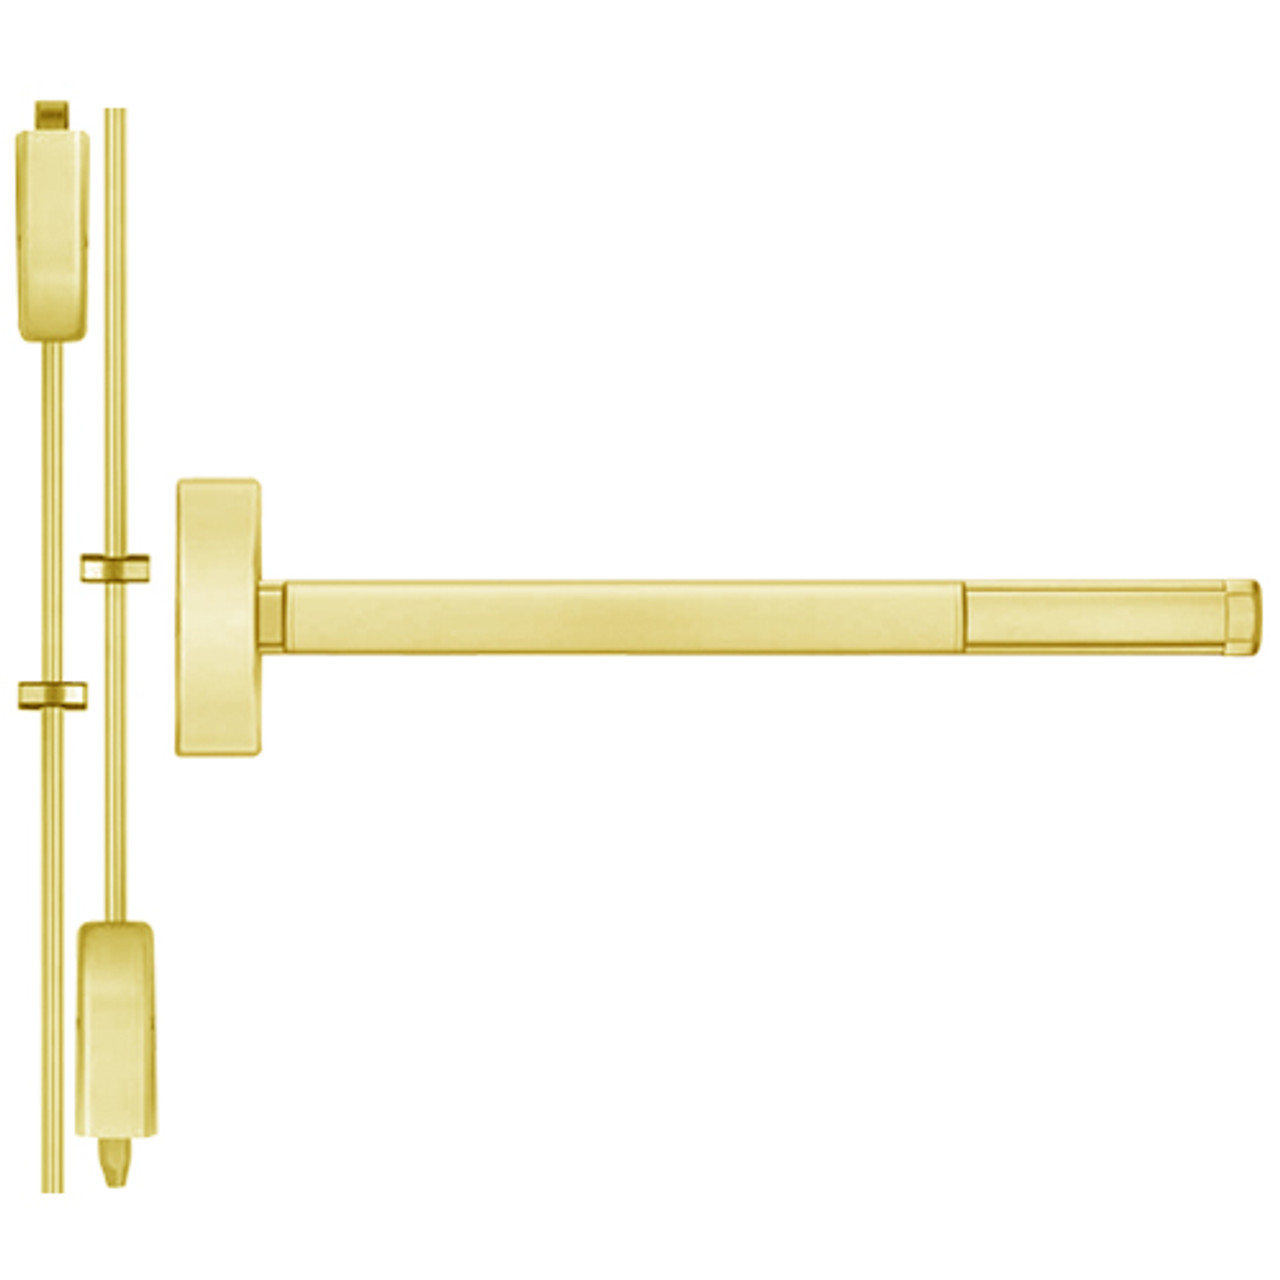 2201LBRCD-605-36 PHI 2200 Series Non Fire Rated Apex Surface Vertical Rod Device Prepped for Cover Plate in Bright Brass Finish